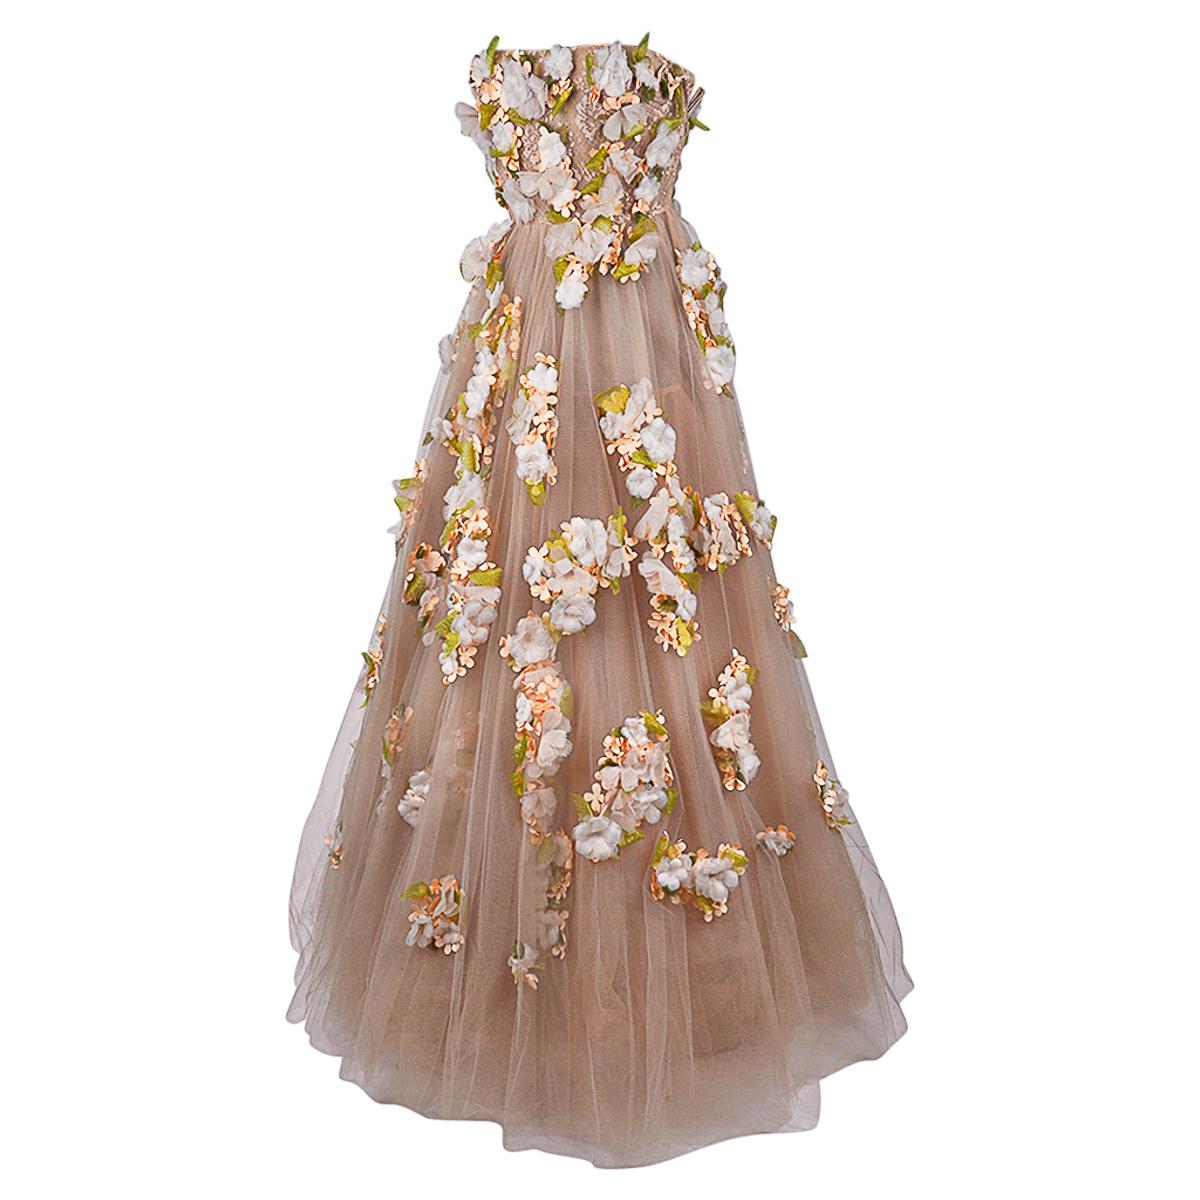 Valentino Strapless Empire Nude Flower Adorned Gown 1 of 2 Size 0 For Sale 10